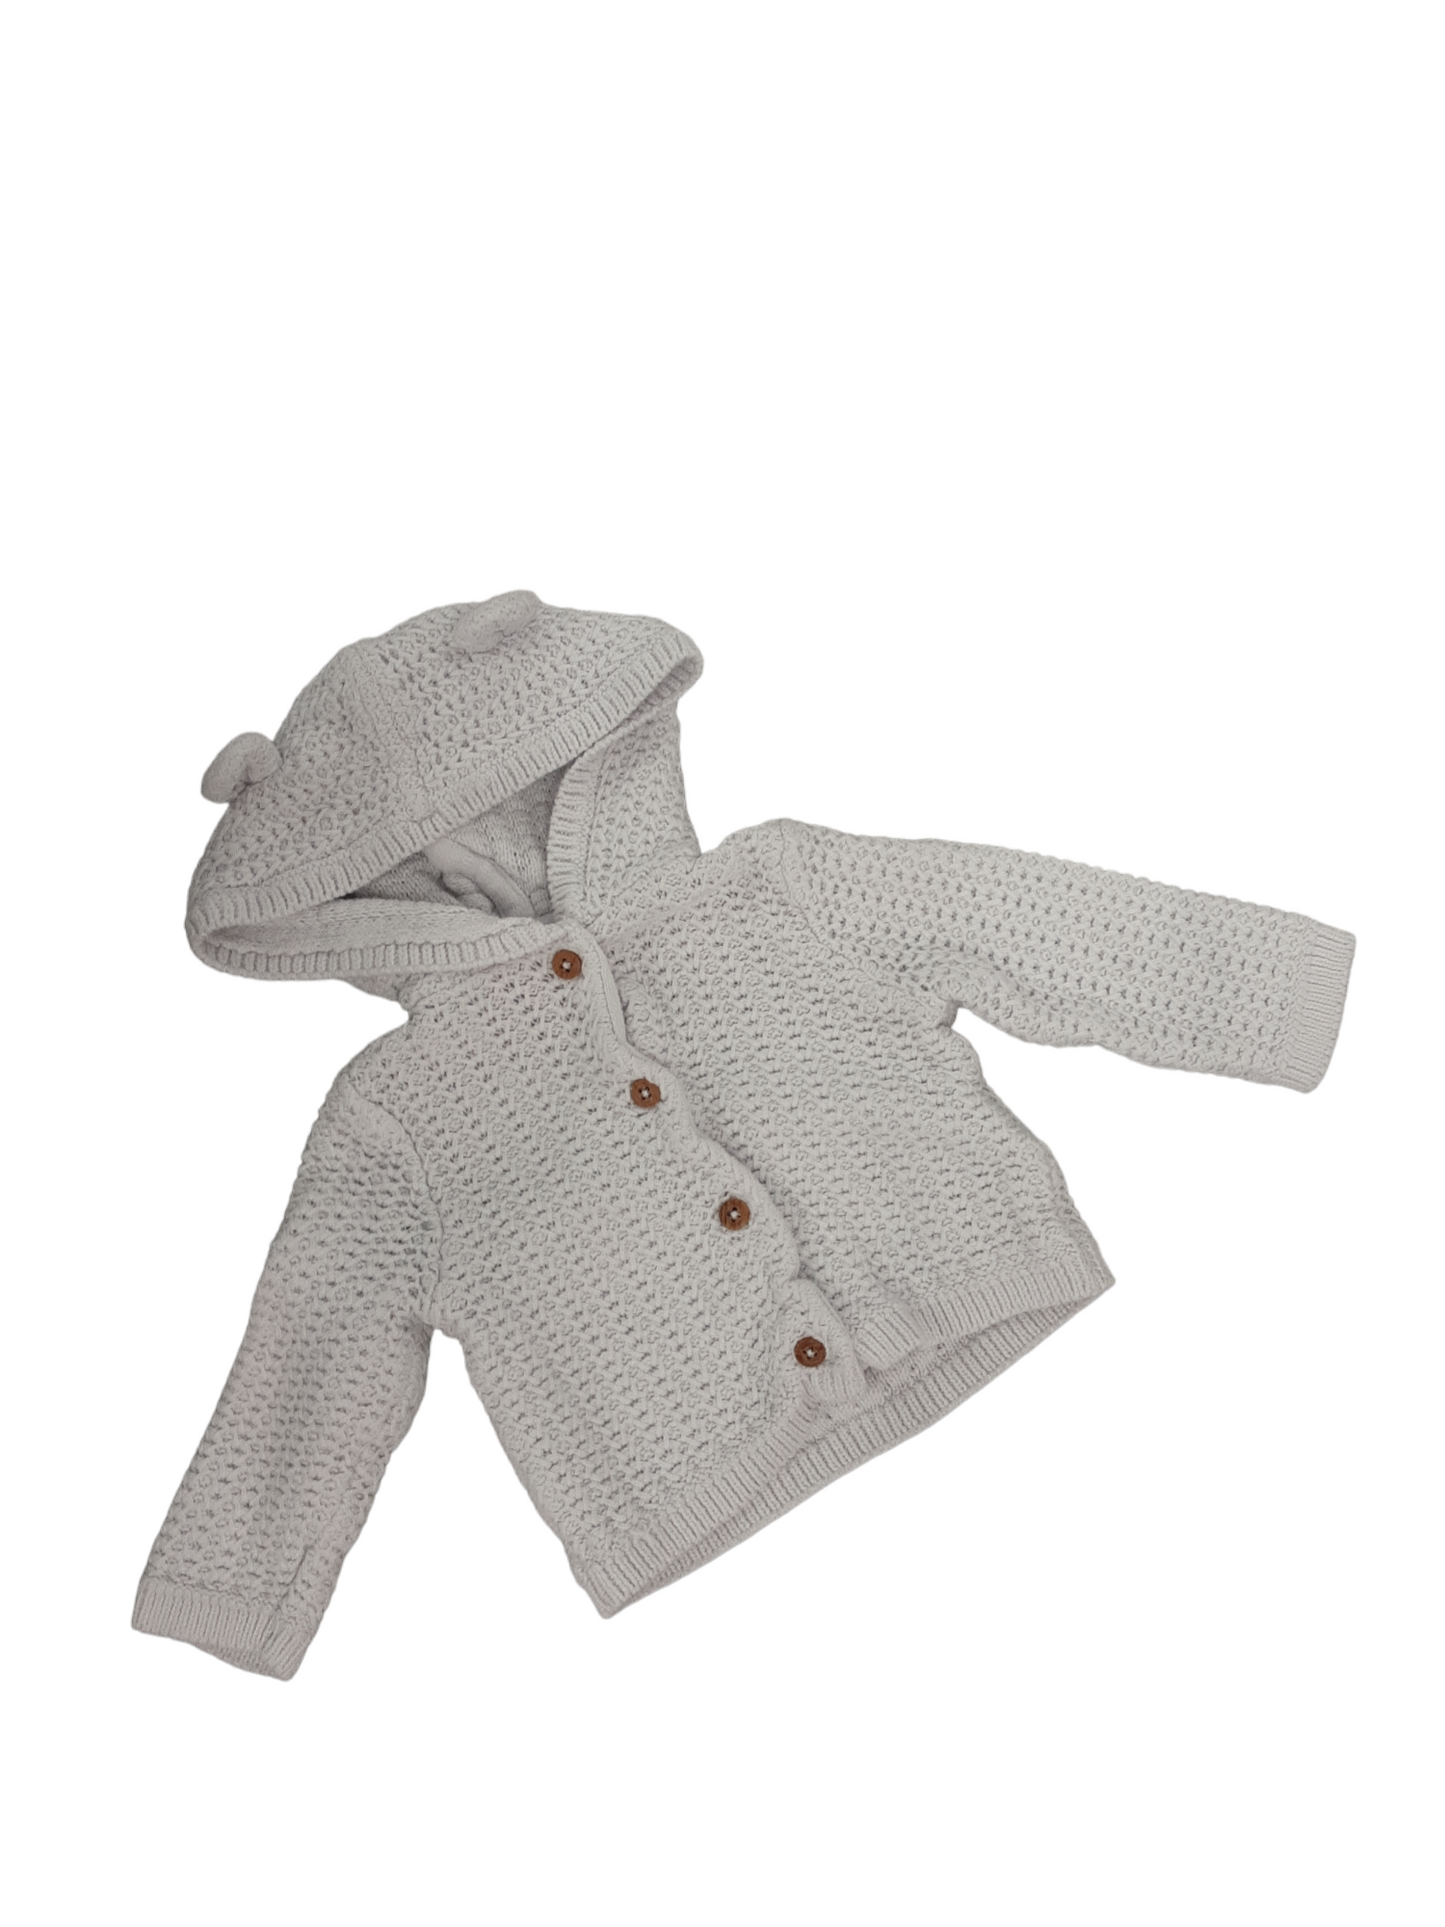 White bear eared hoody size 3 to 6 months